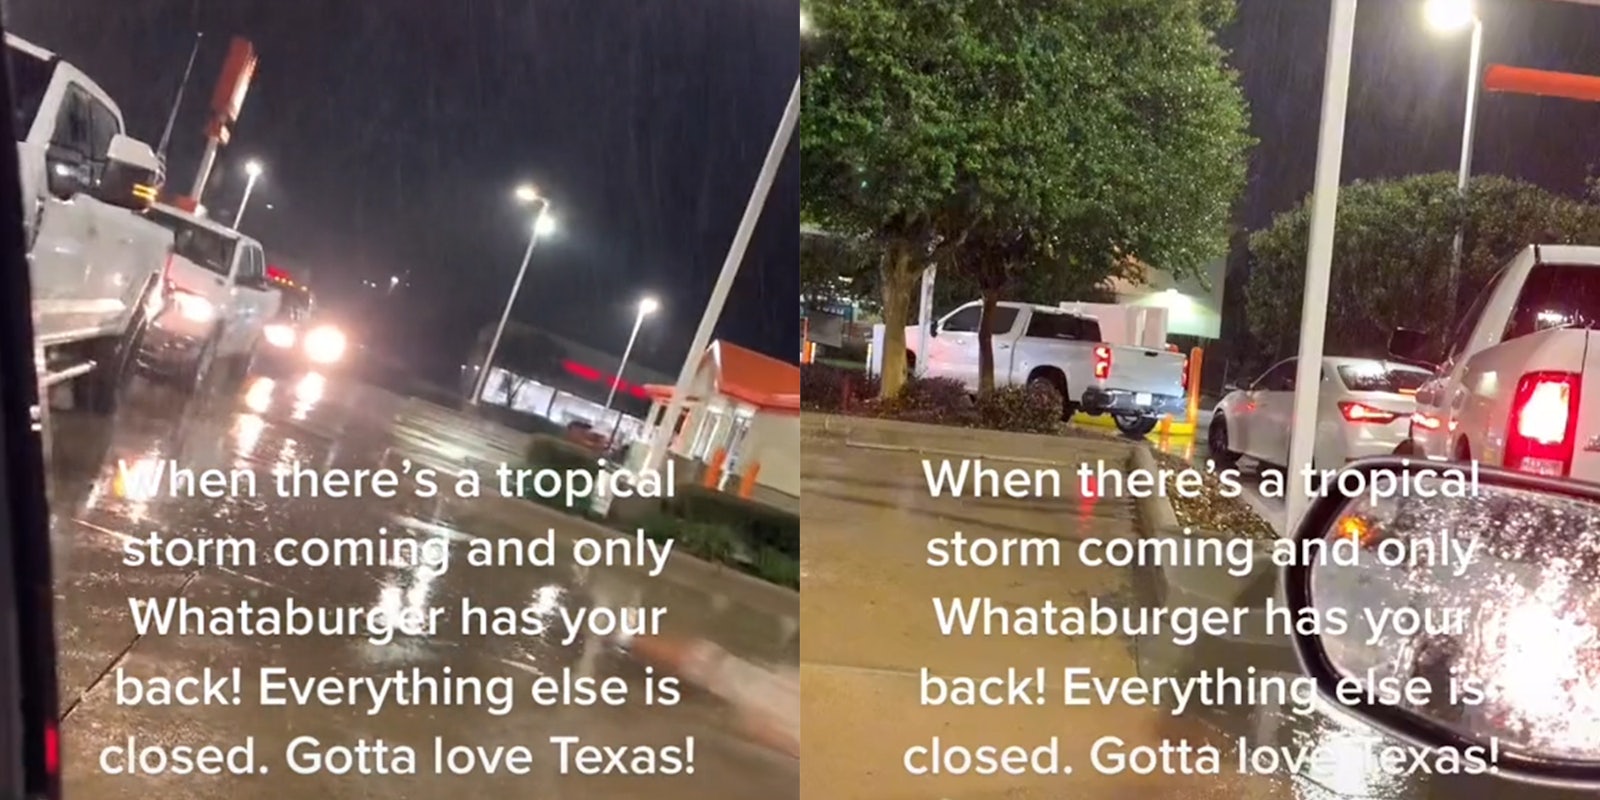 Whataburger drive-thru filled with vehicles during tropical storm with caption 'When there's a tropical storm coming and only Whataburger has your back! Everything else is closed. Gotta love Texas!'